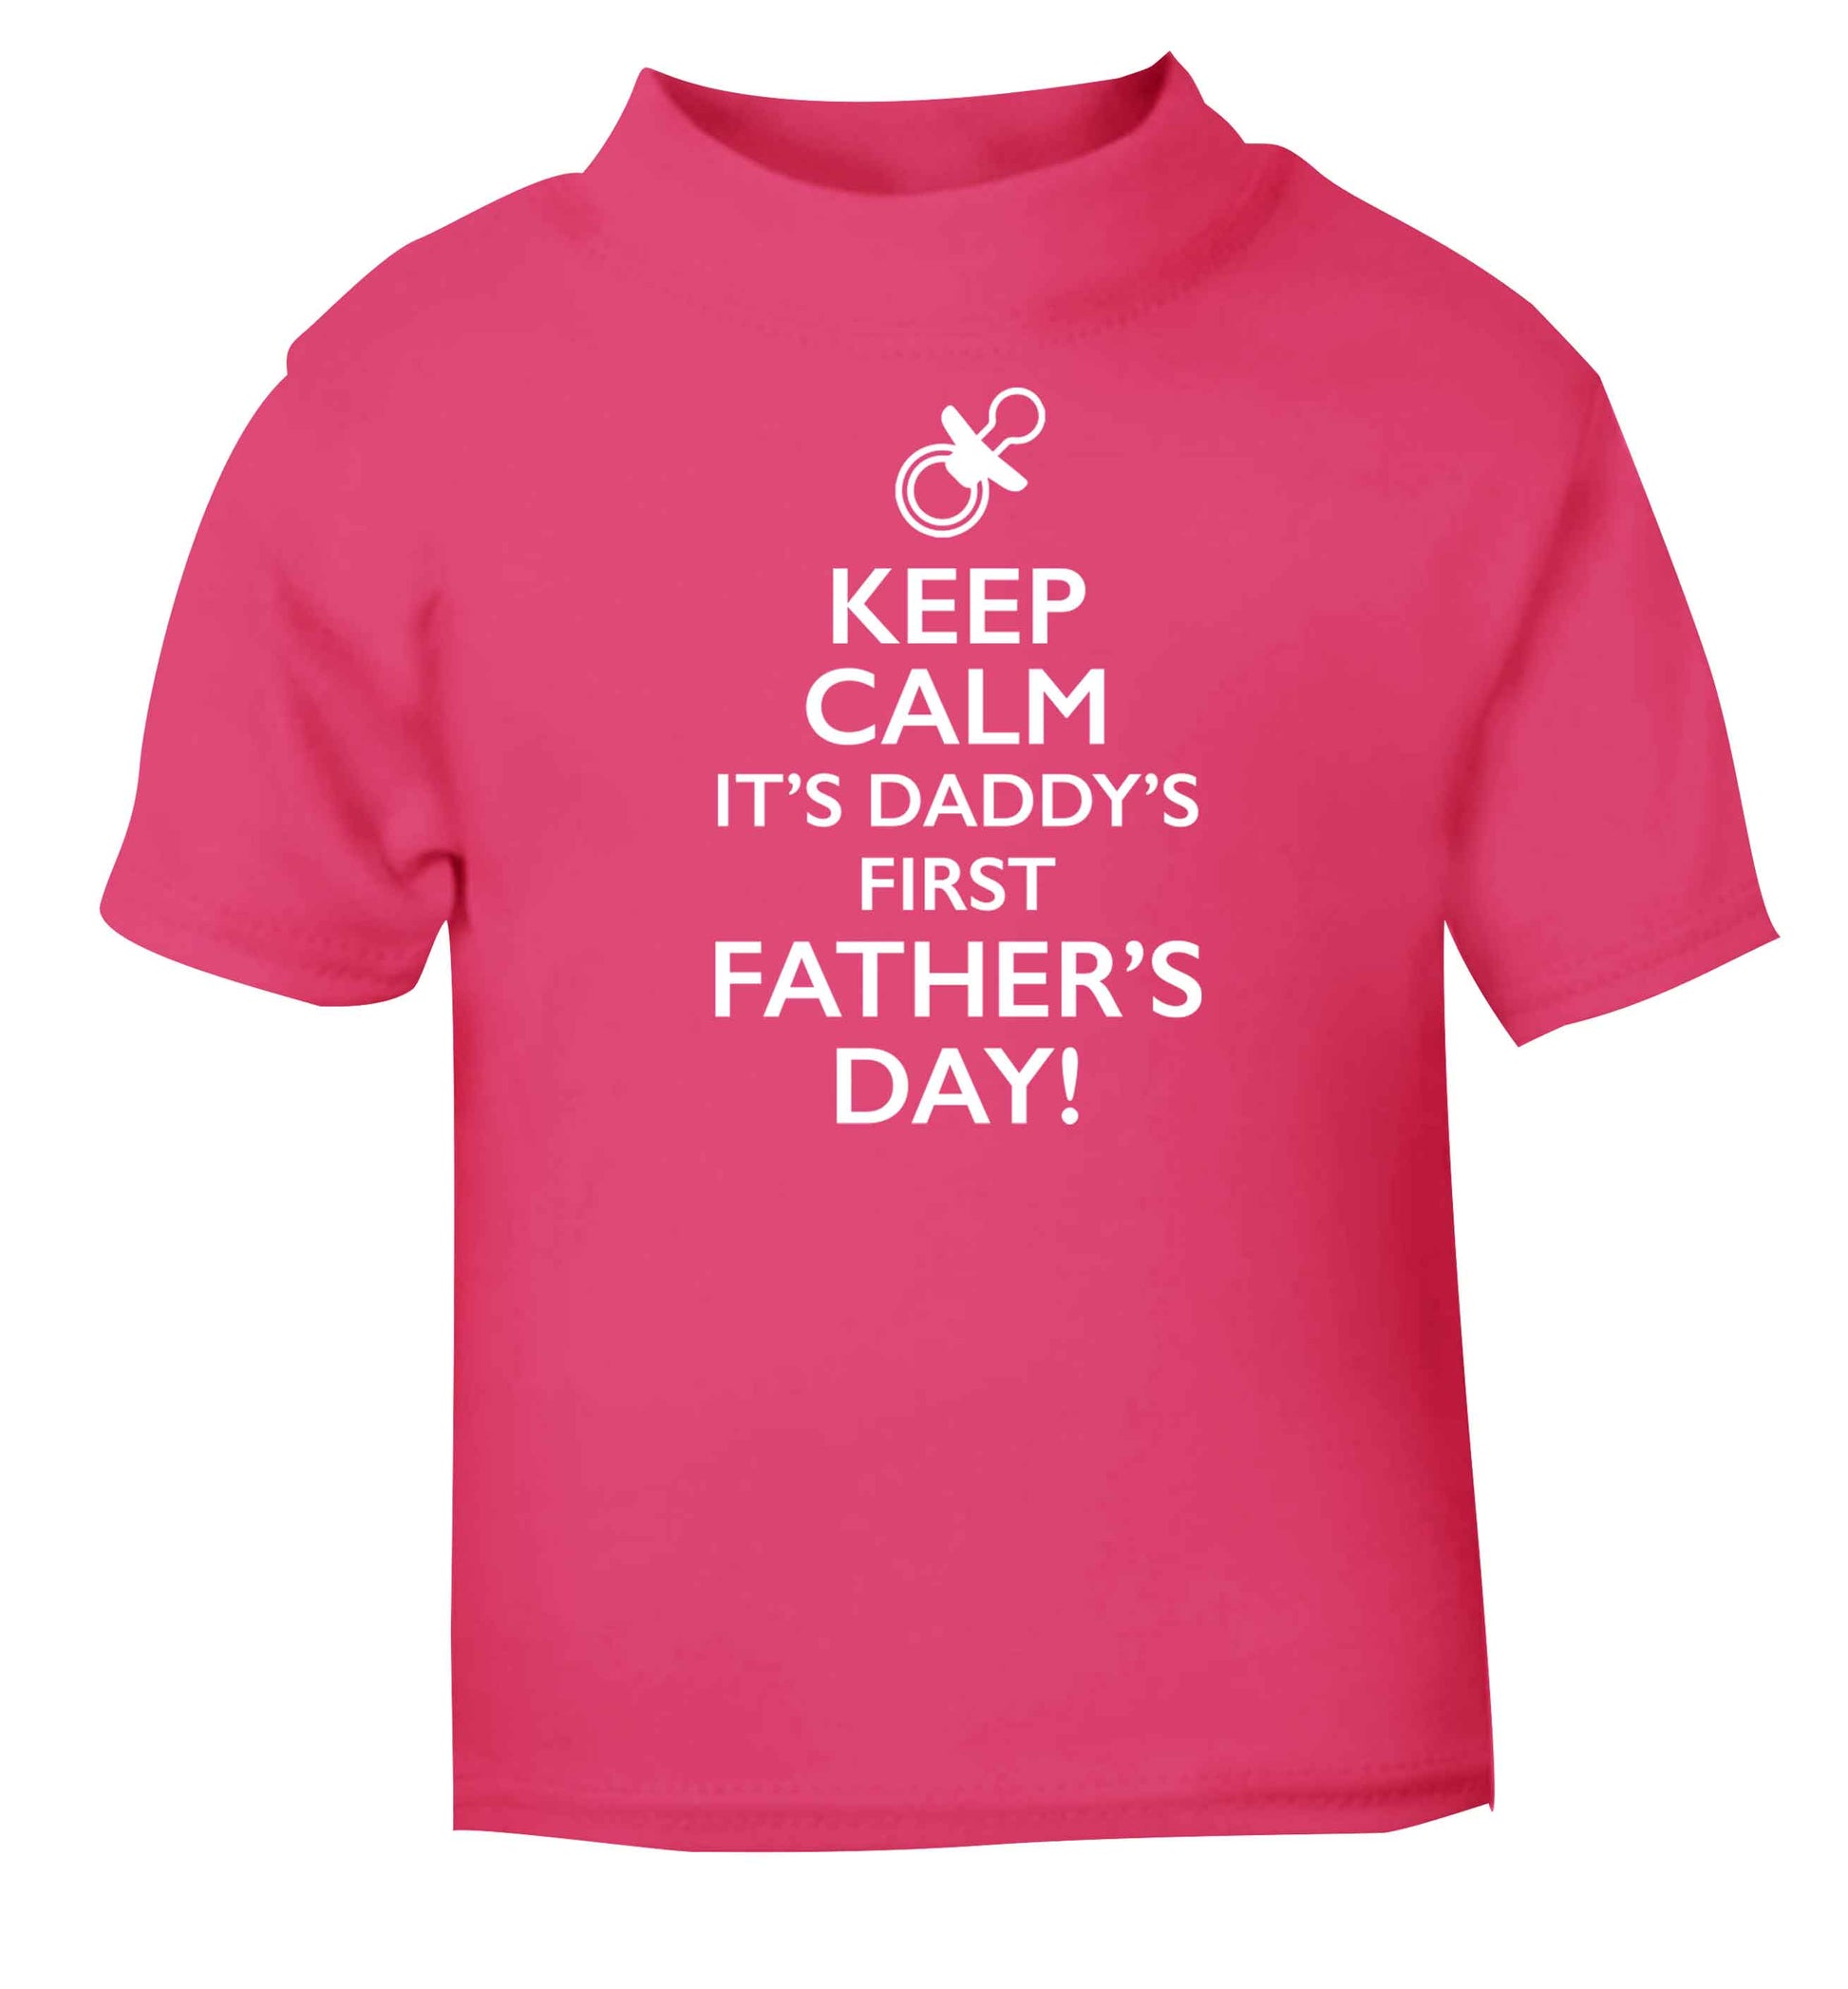 Keep calm it's daddys first father's day pink baby toddler Tshirt 2 Years